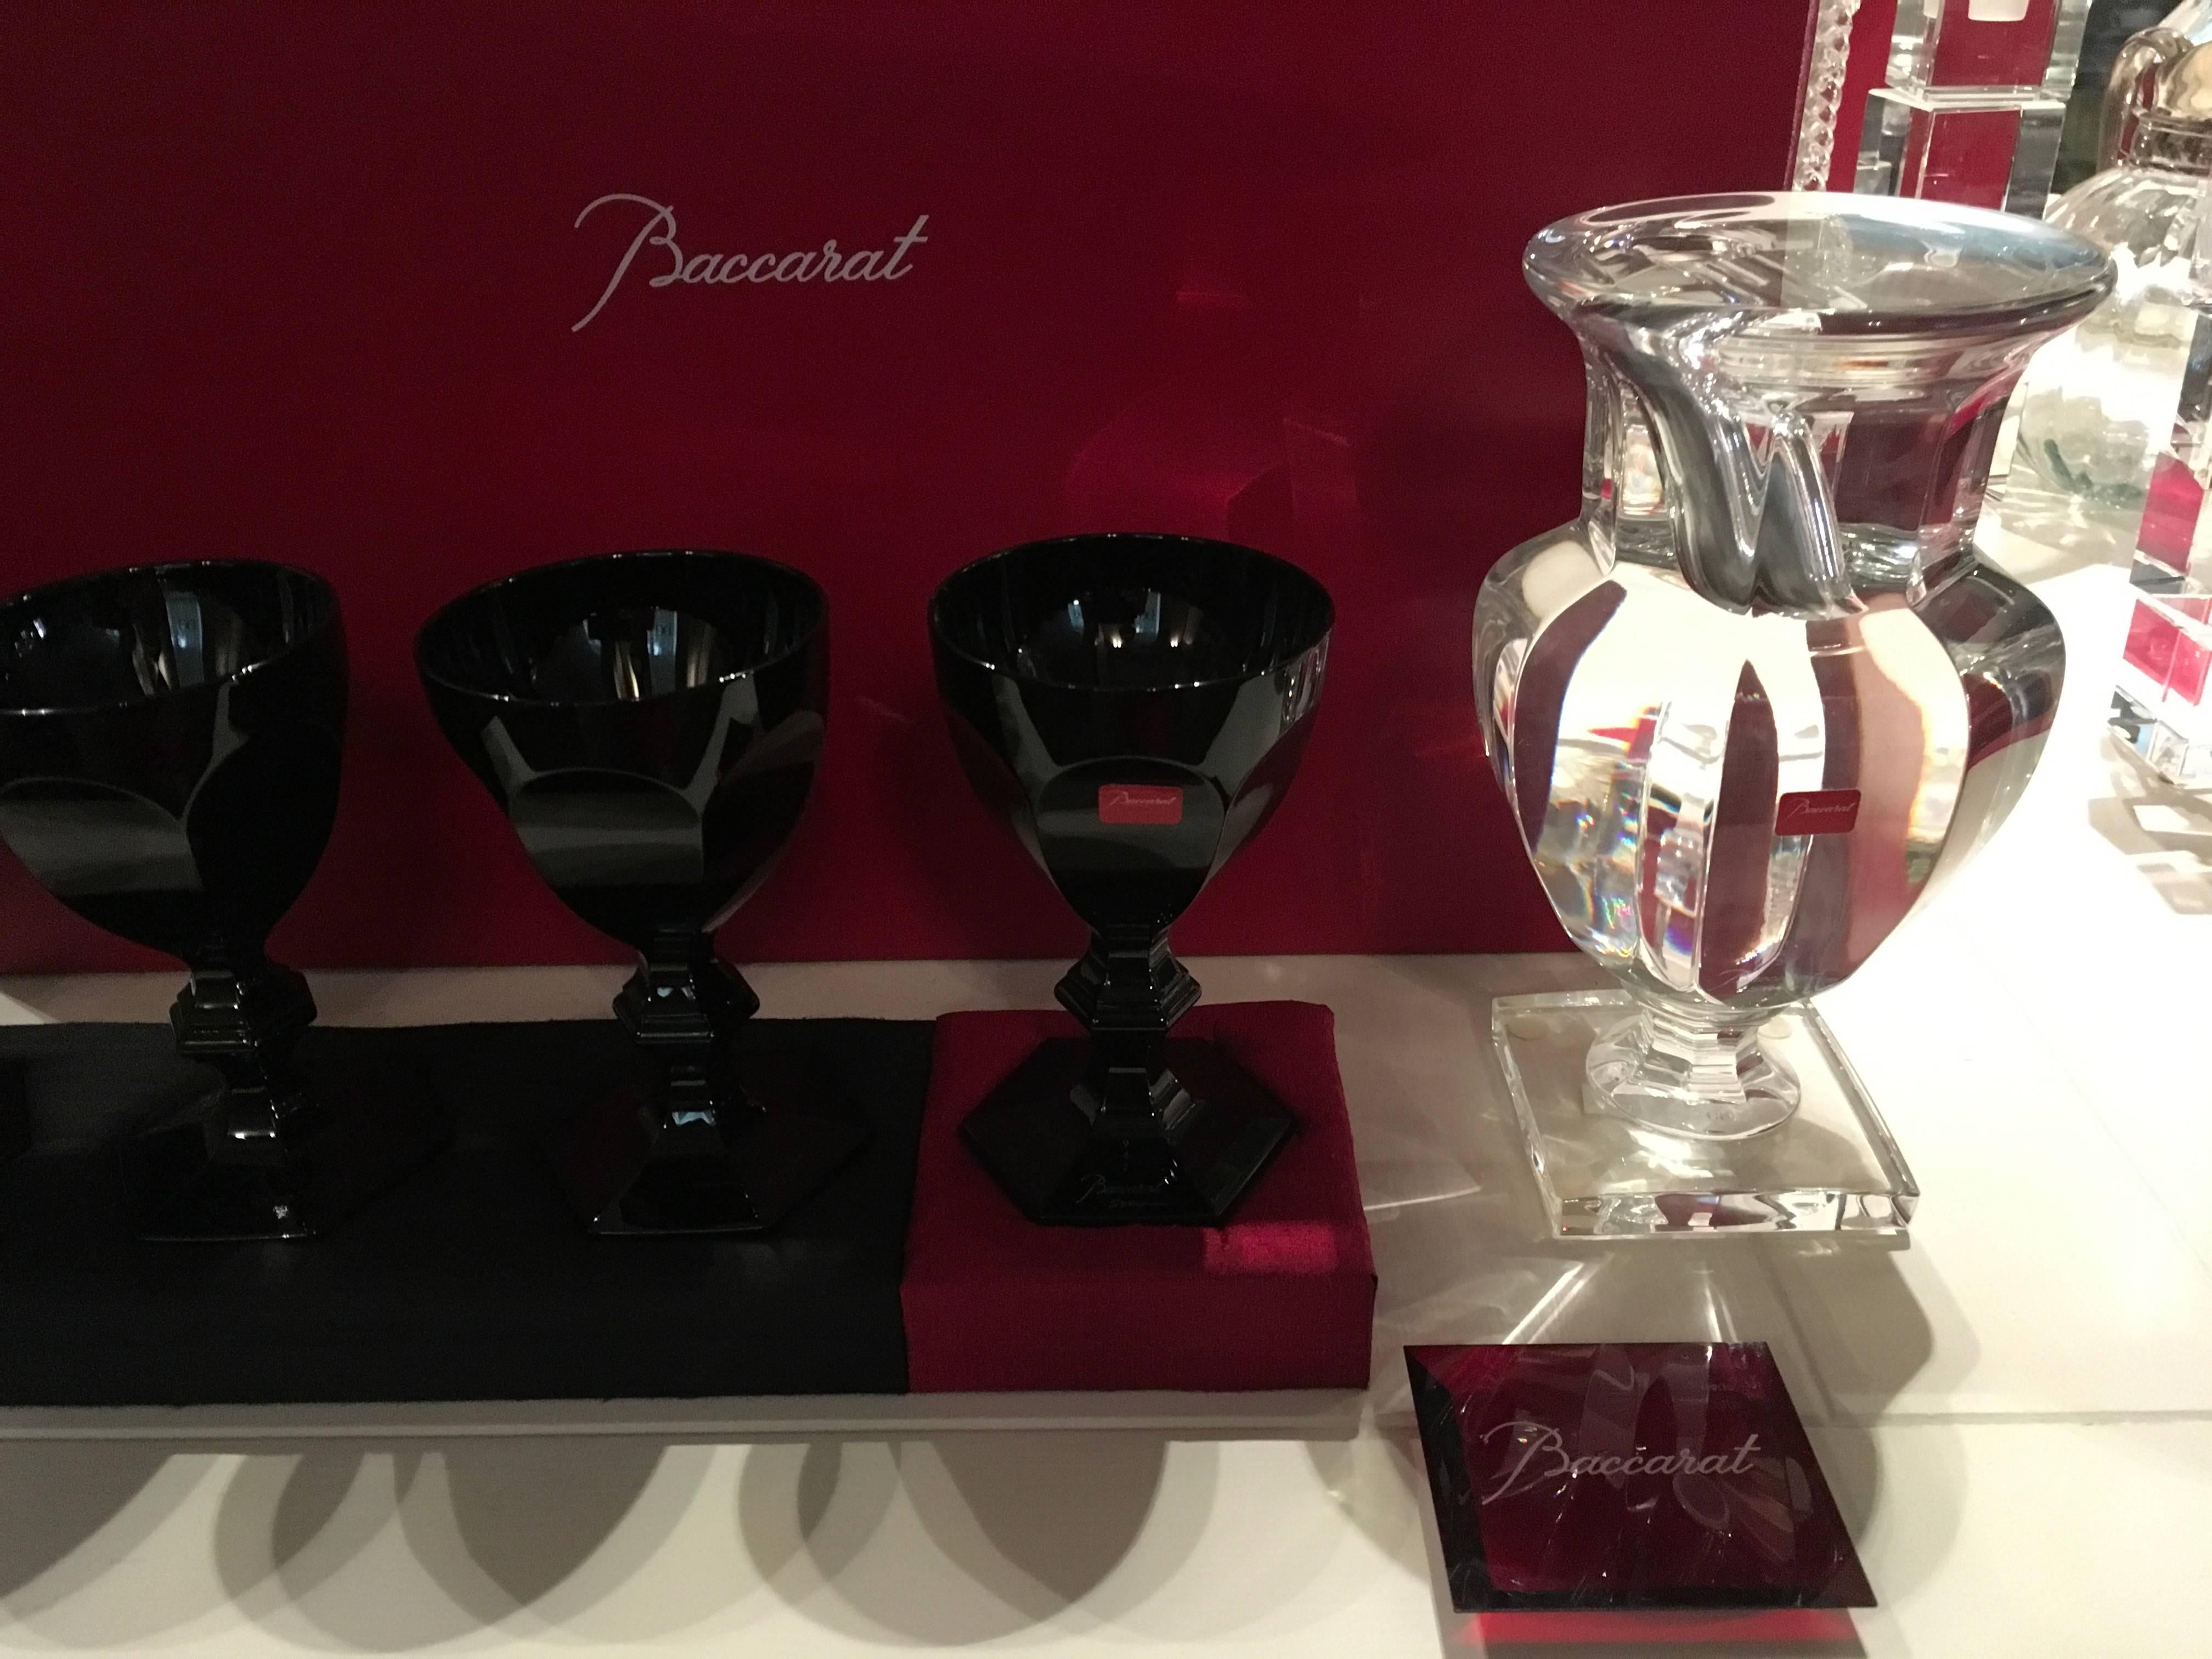 Cast Baccarat Contemporary Design Black Crystal Glass by Philippe Starck